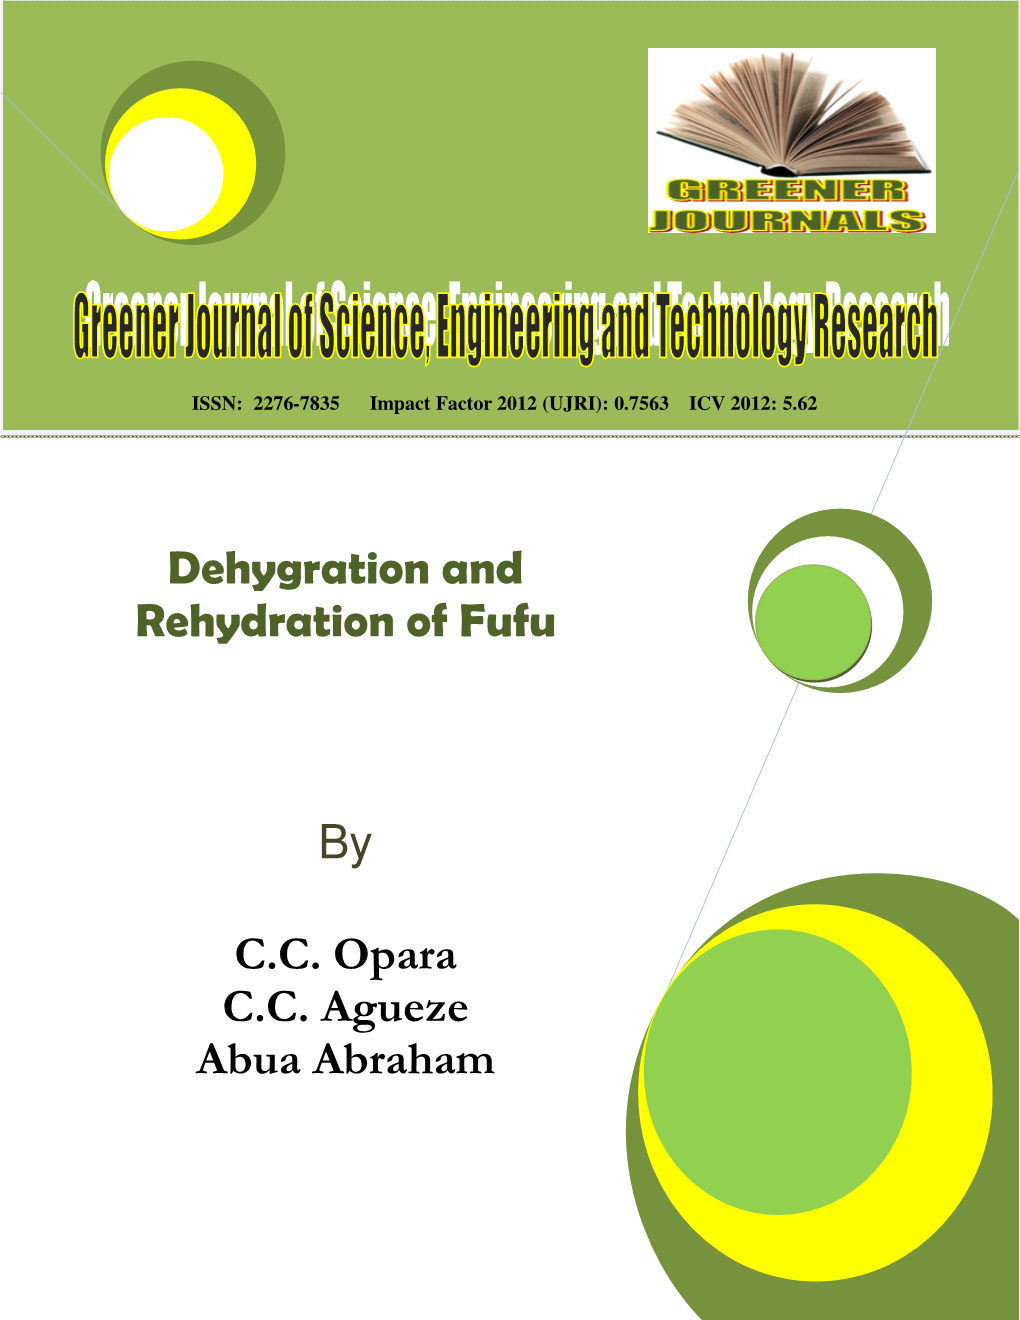 Dehygration and Rehydration of Fufu by C.C. Opara C.C. Agueze Abua